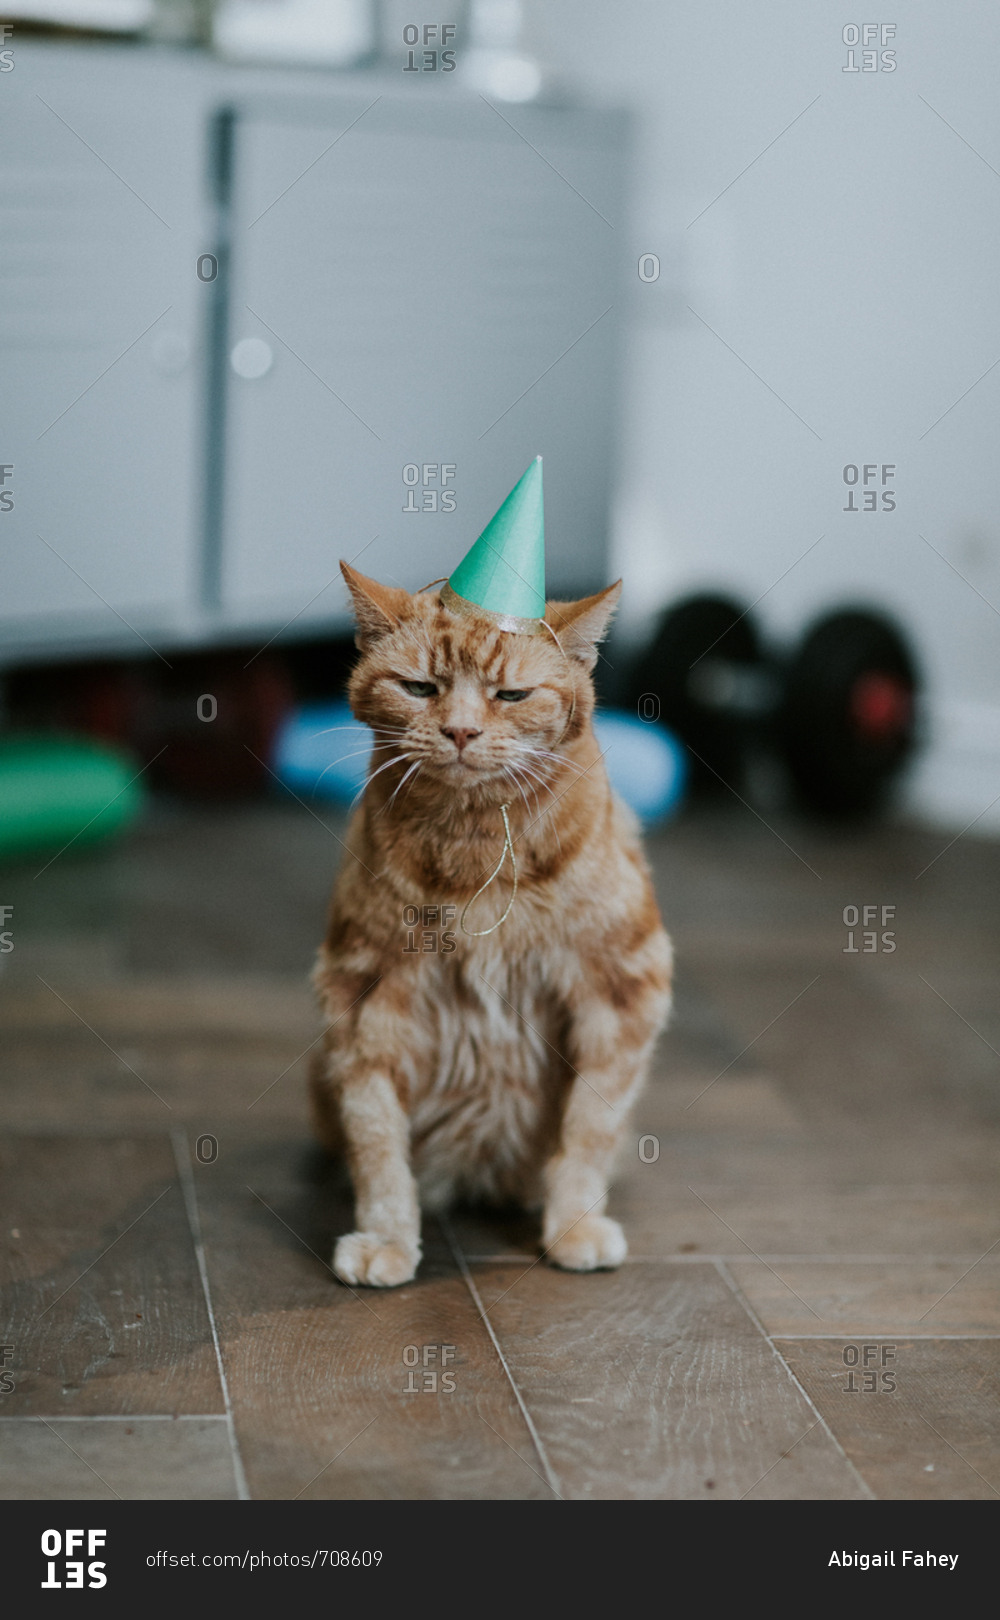 Disgruntled cat with birthday hat sitting in middle of room